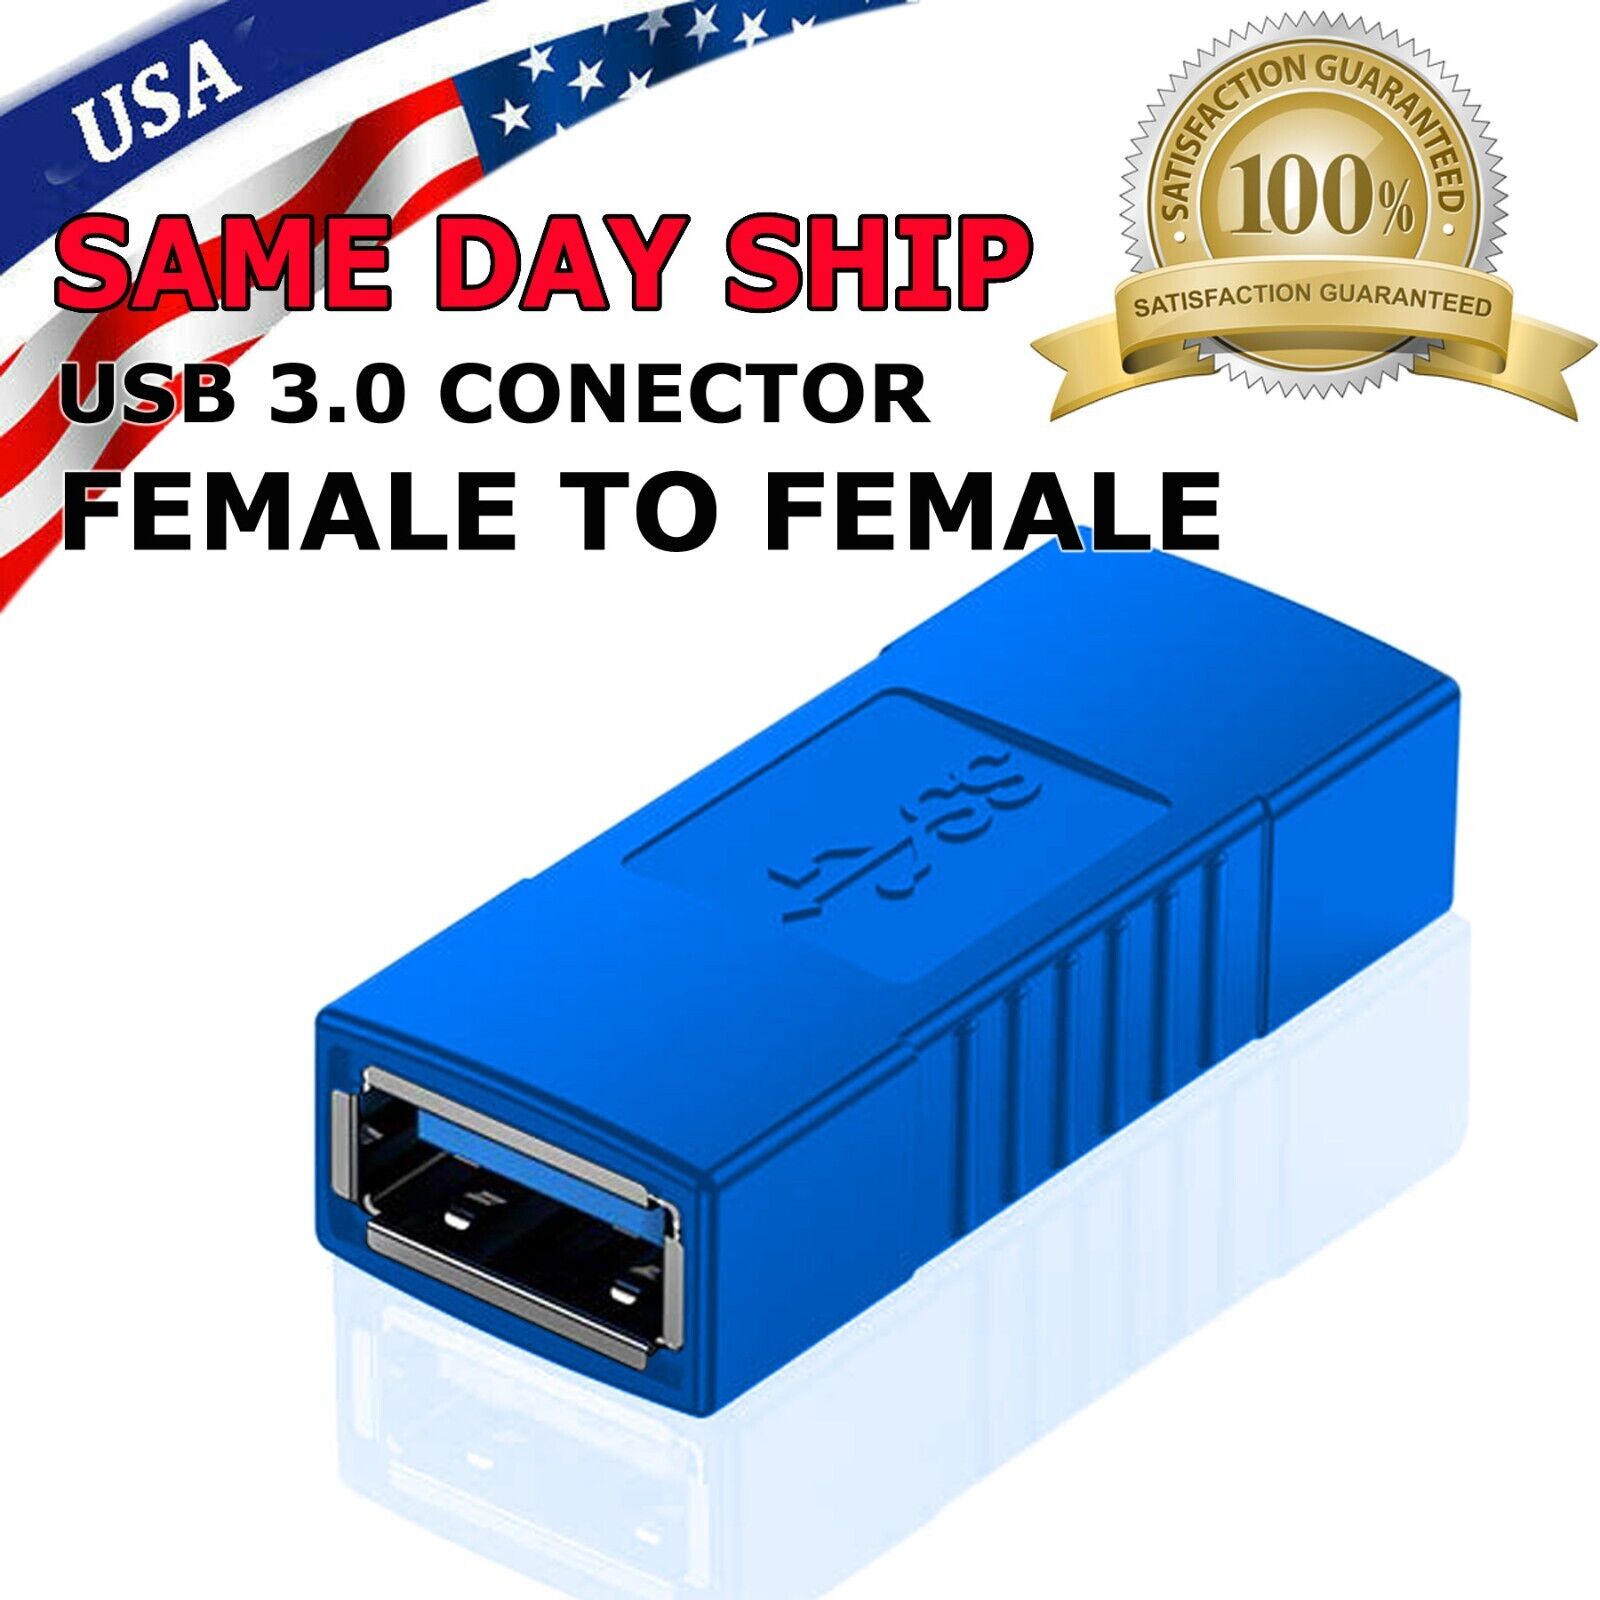 New USB 3.0 Type A Female to Female Adapter Coupler Gender Changer Connector US